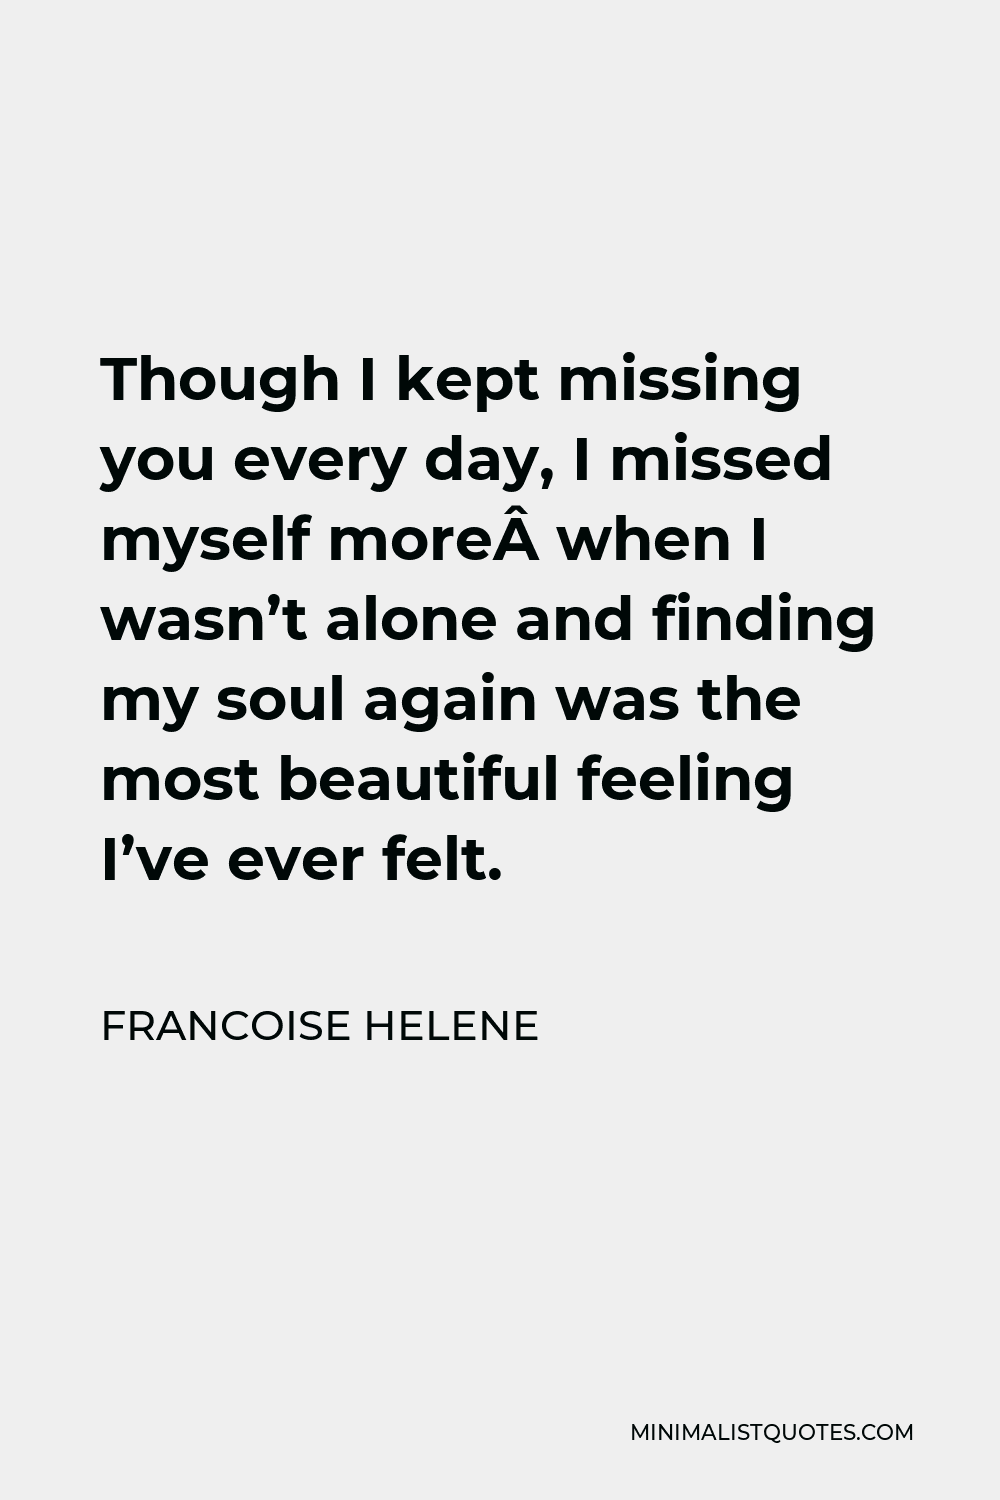 Francoise Helene Quote - Though I kept missing you every day, I missed myself more when I wasn’t alone and finding my soul again was the most beautiful feeling I’ve ever felt.